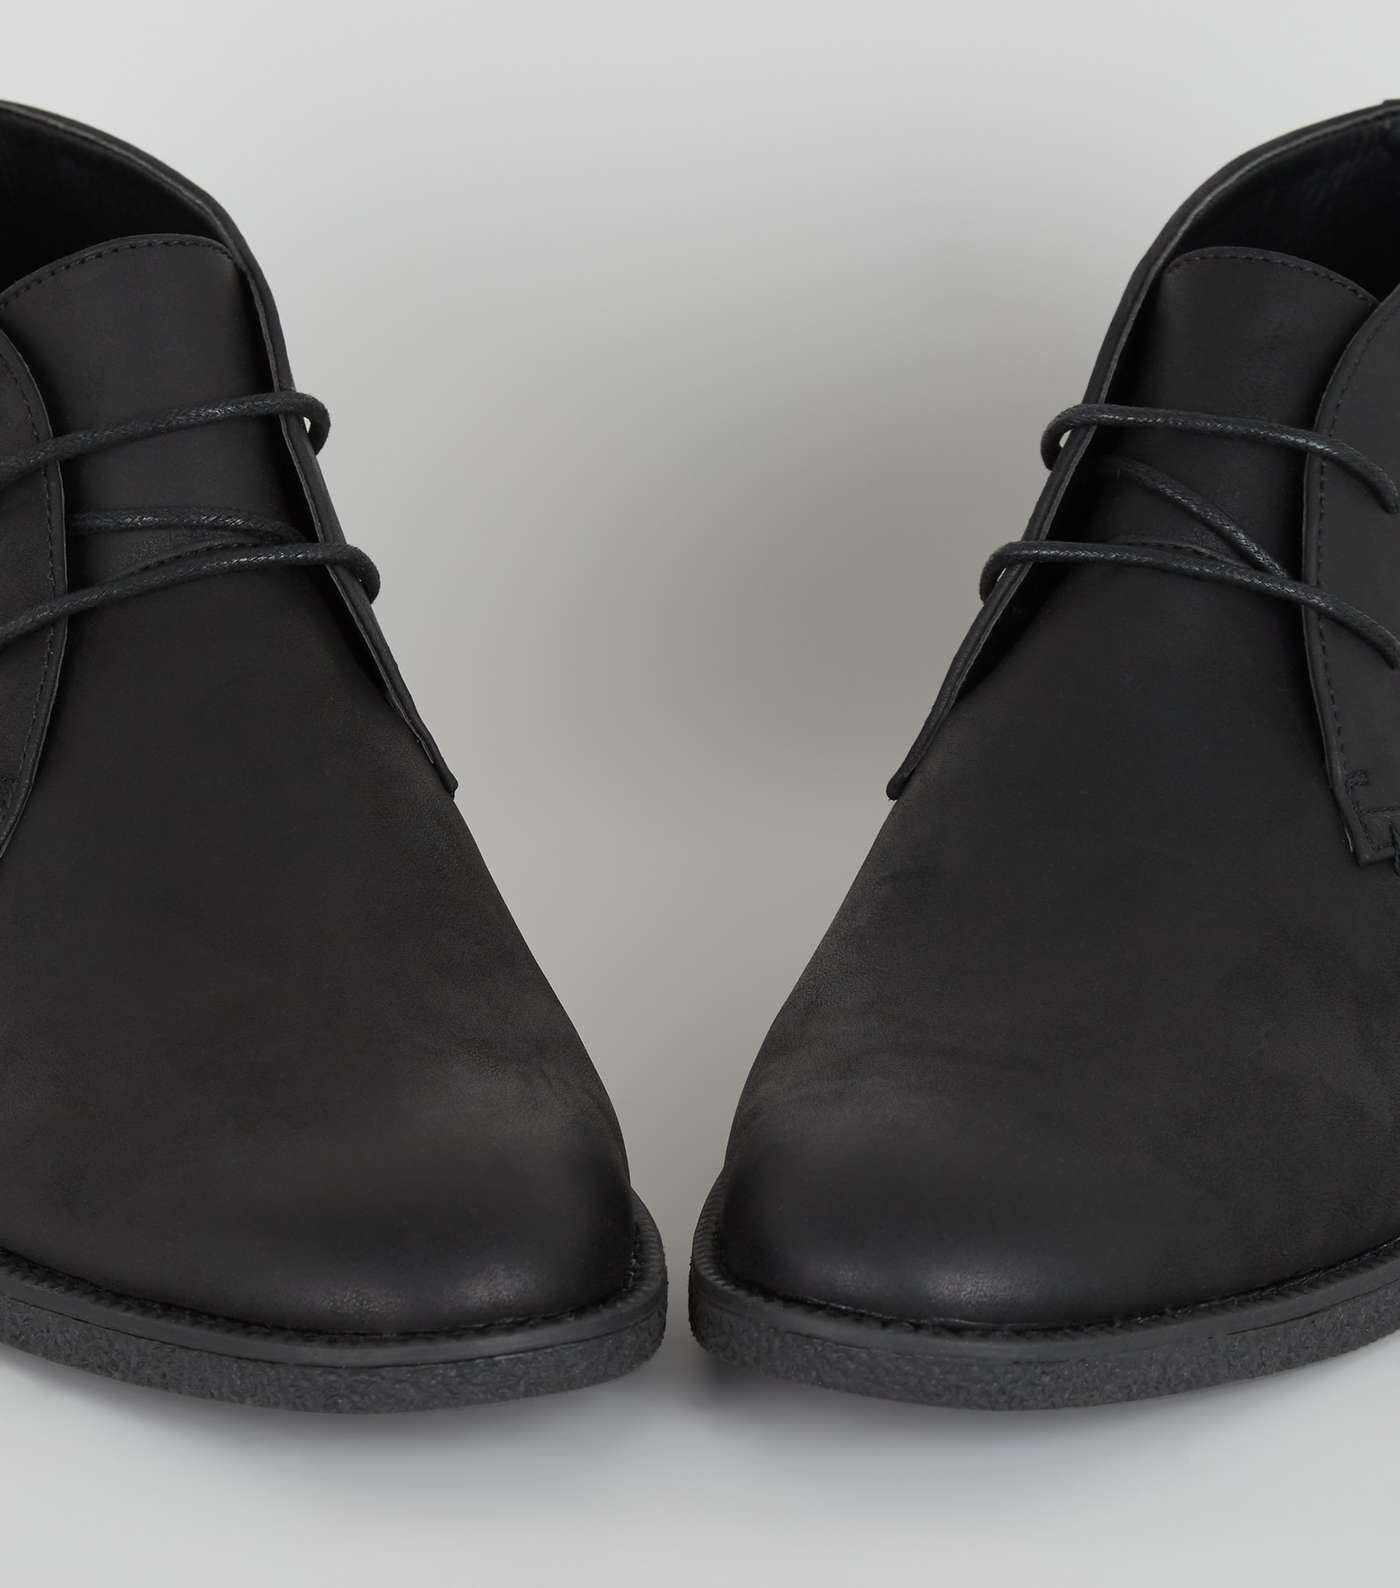 Black Leather-Look Desert Boots Image 3